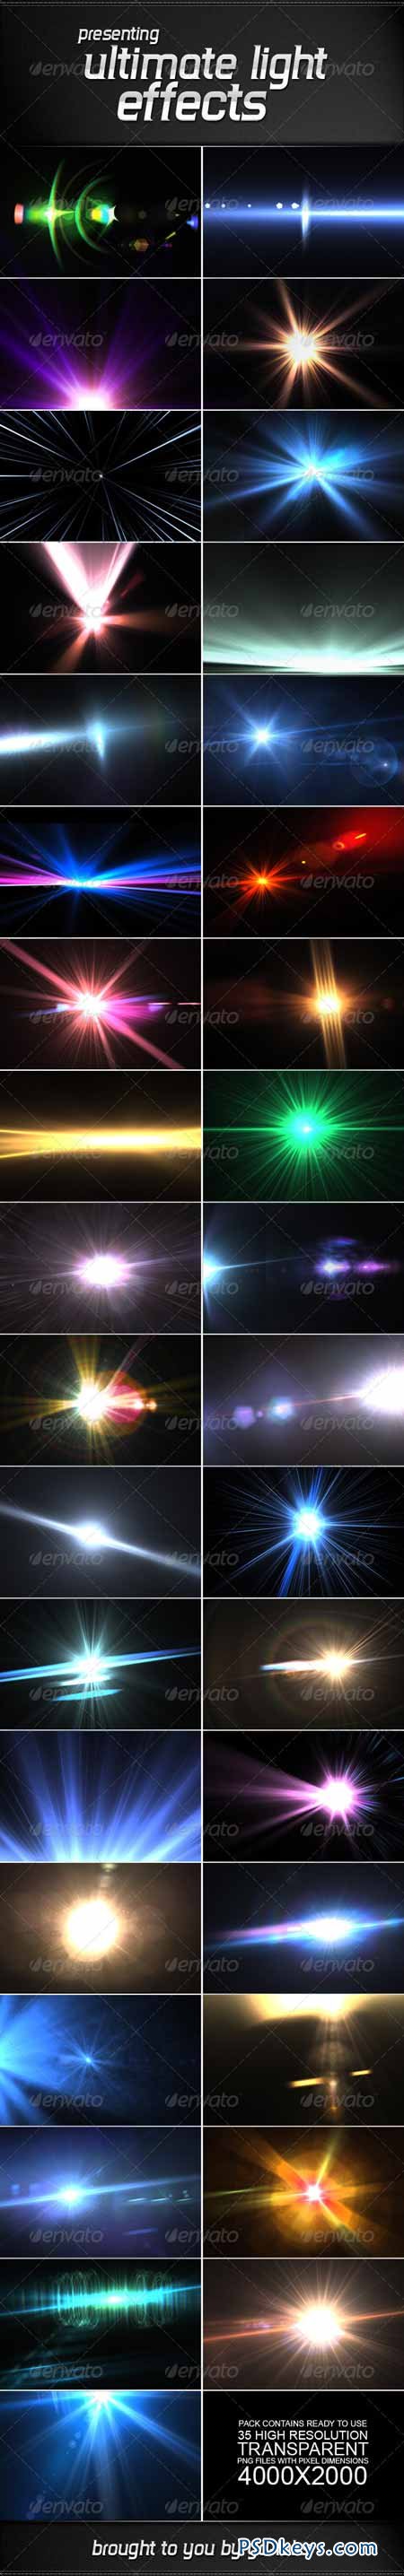 35 Ultimate Light Effects Volume 3 2659075